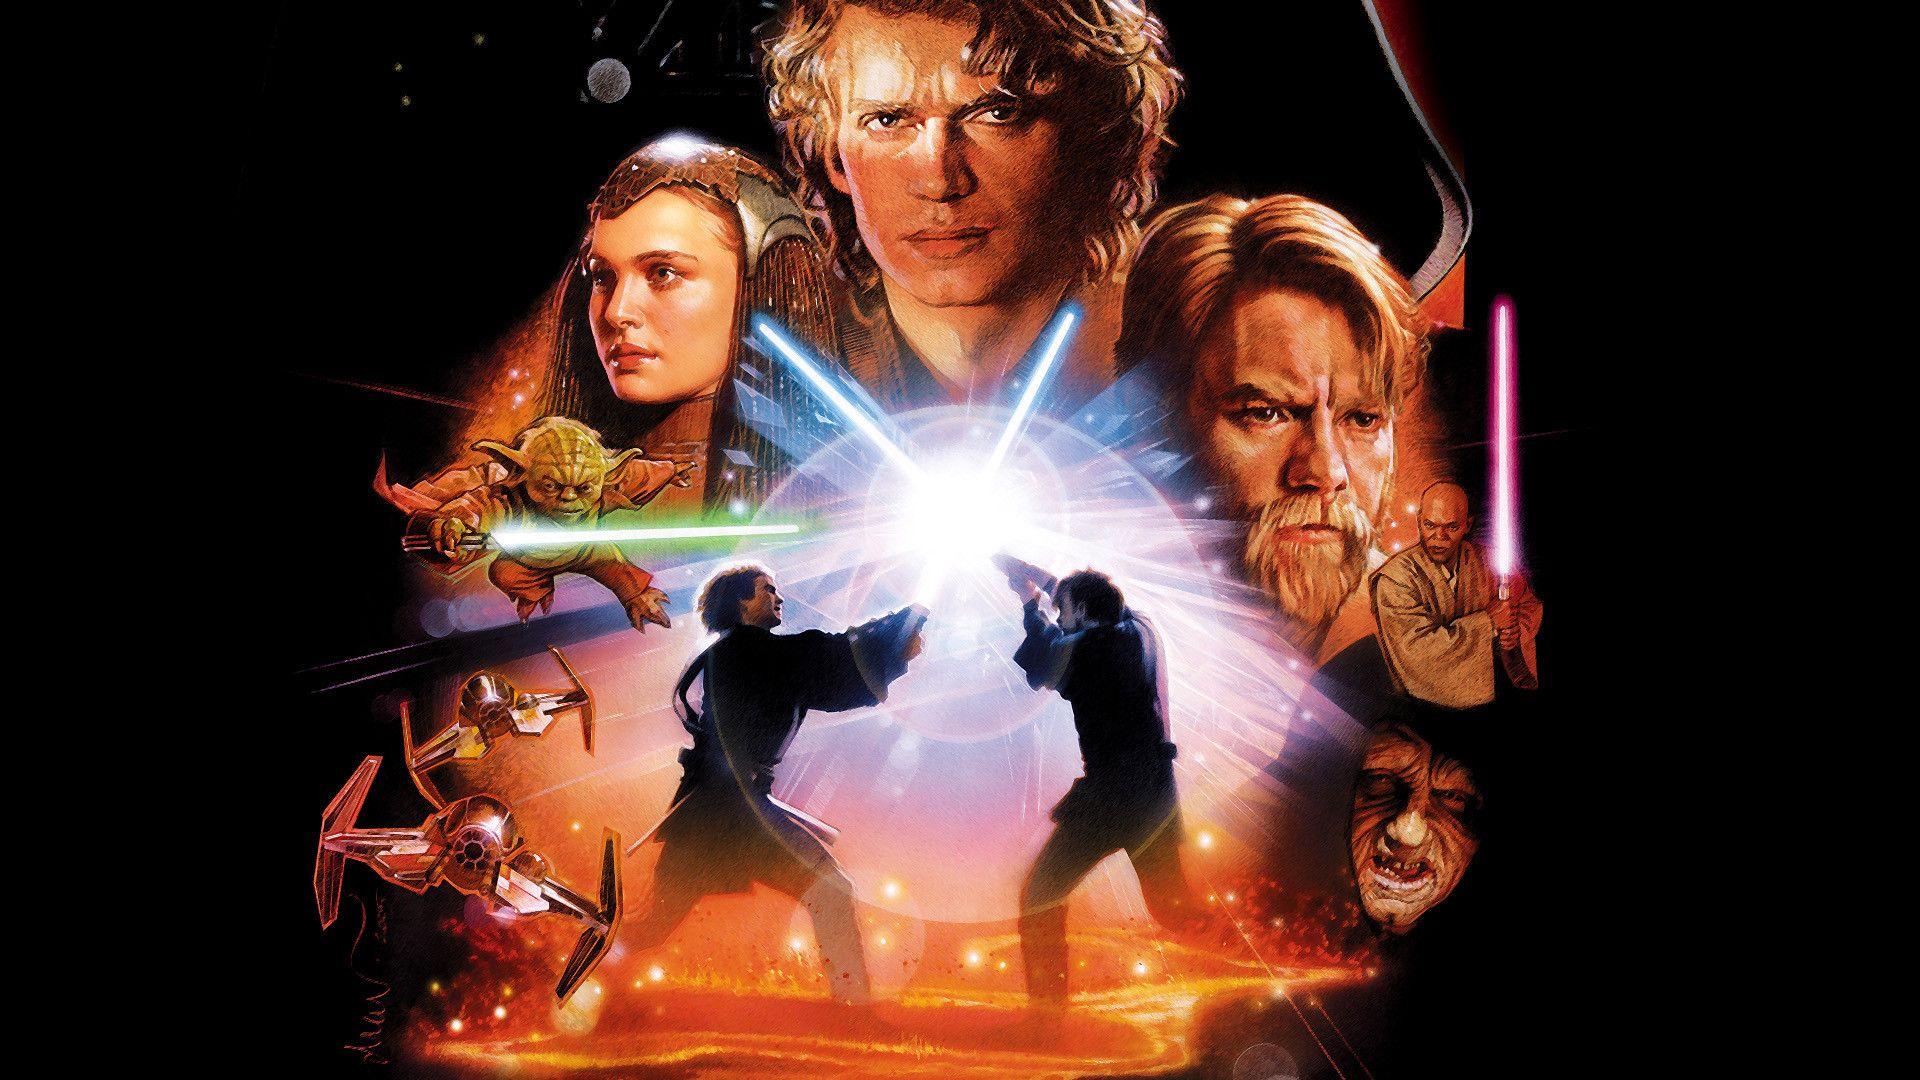 for windows download Star Wars Ep. III: Revenge of the Sith